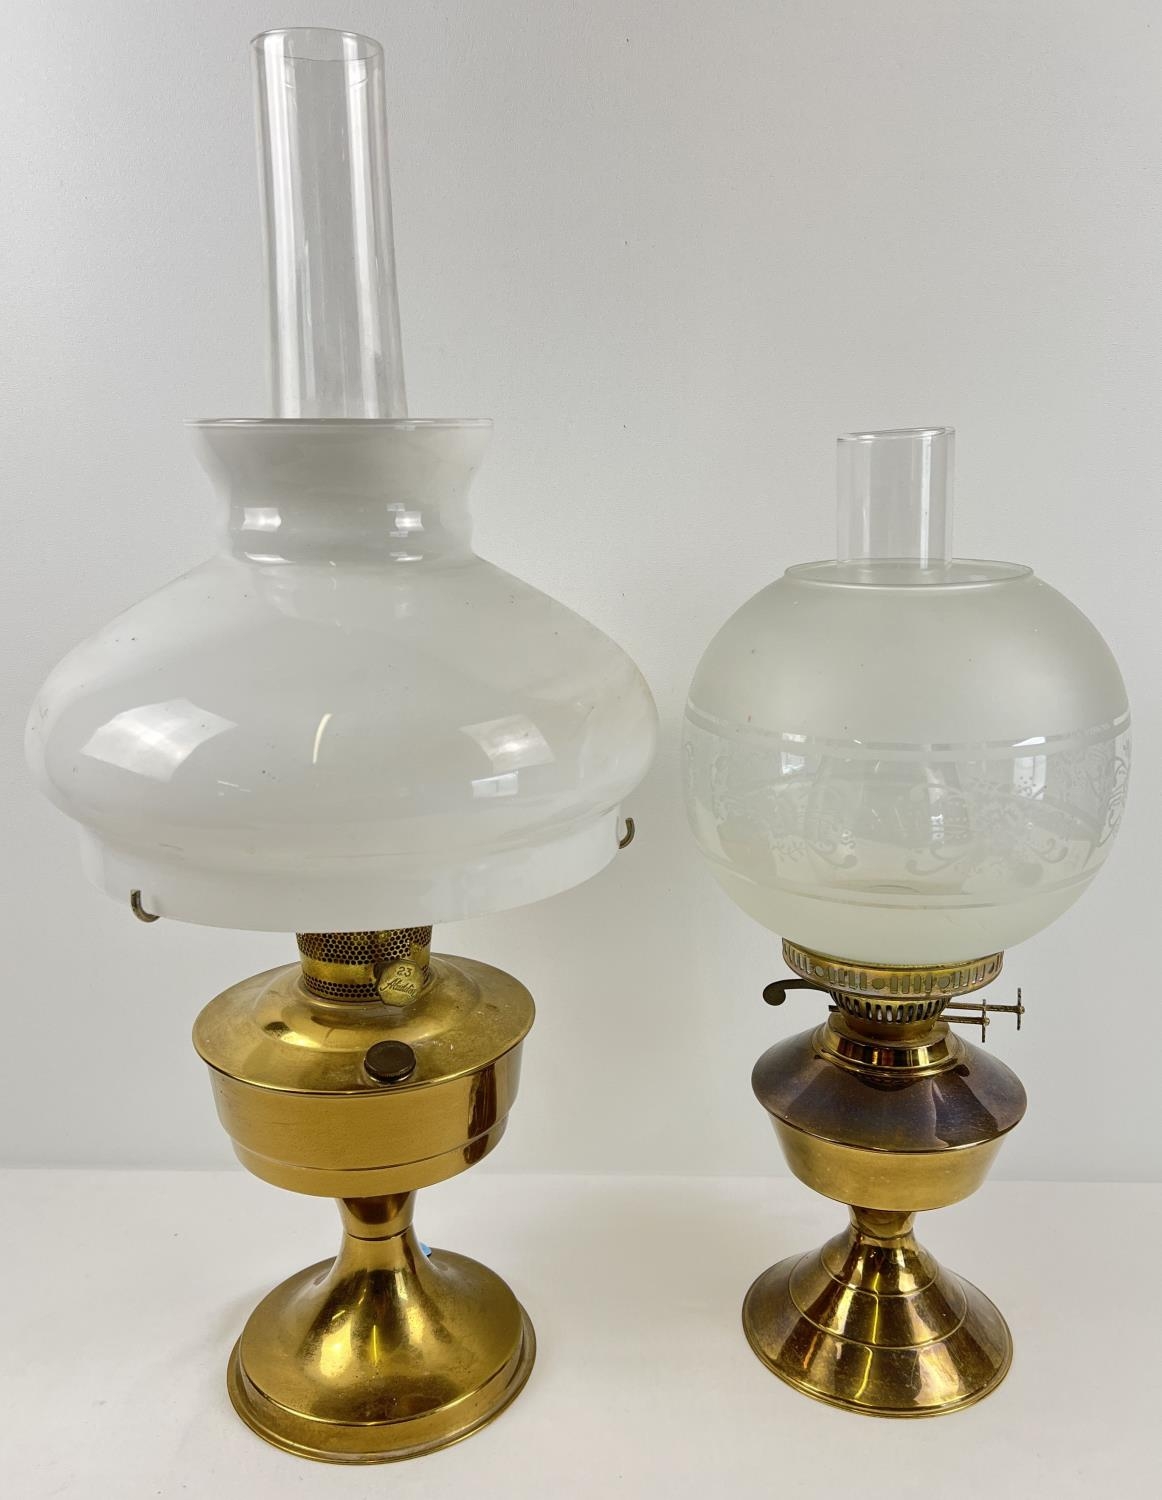 2 vintage brass based oil lamps with glass shades and chimneys. Largest approx. 60cm tall (with